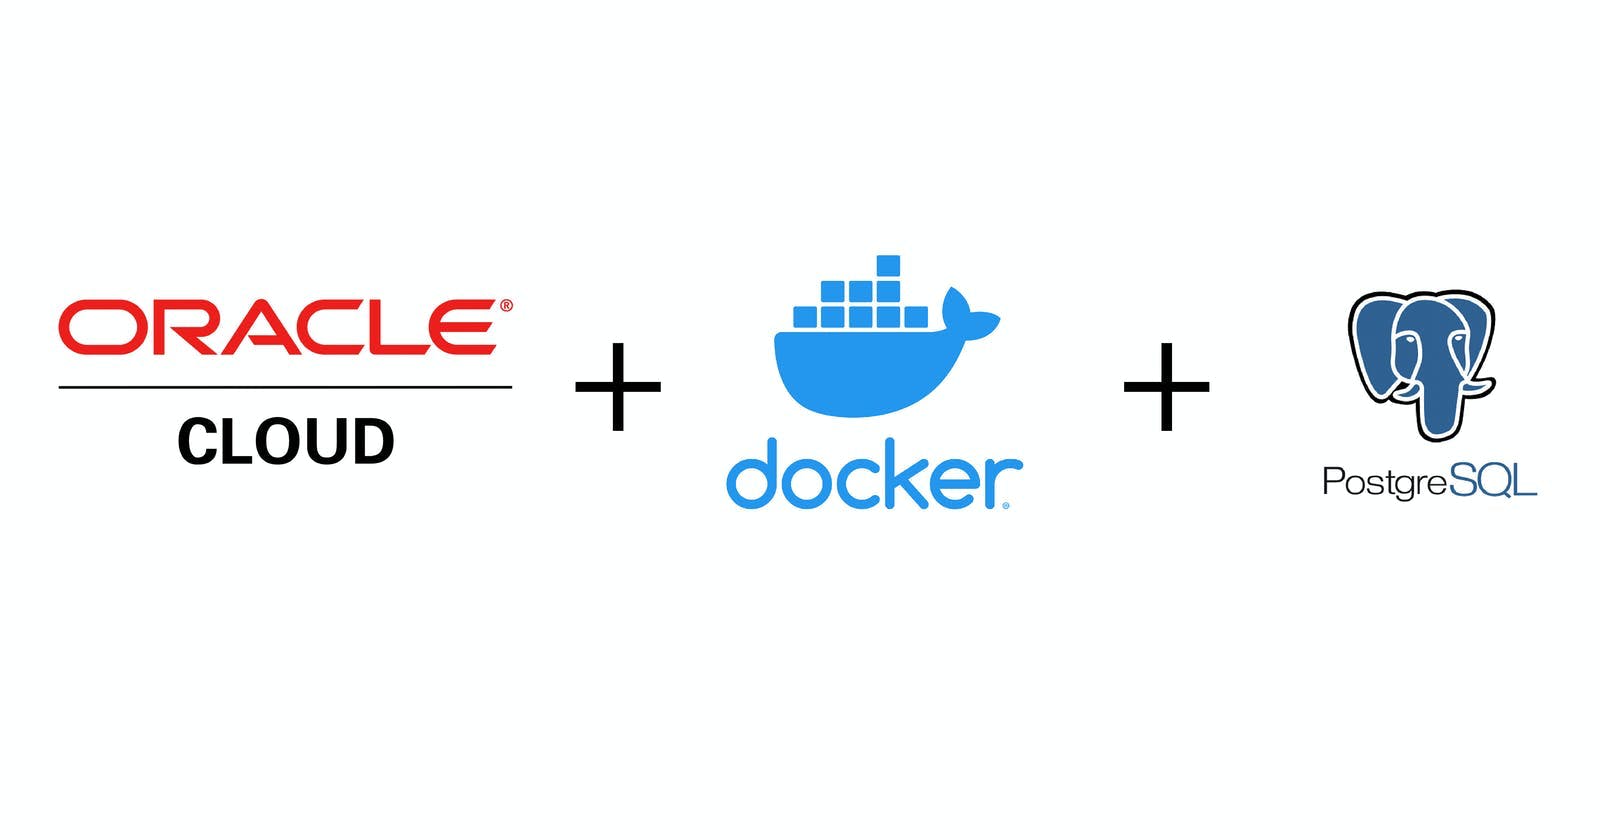 How to Run a Postgres Docker Container on Oracle Cloud Infrastructure